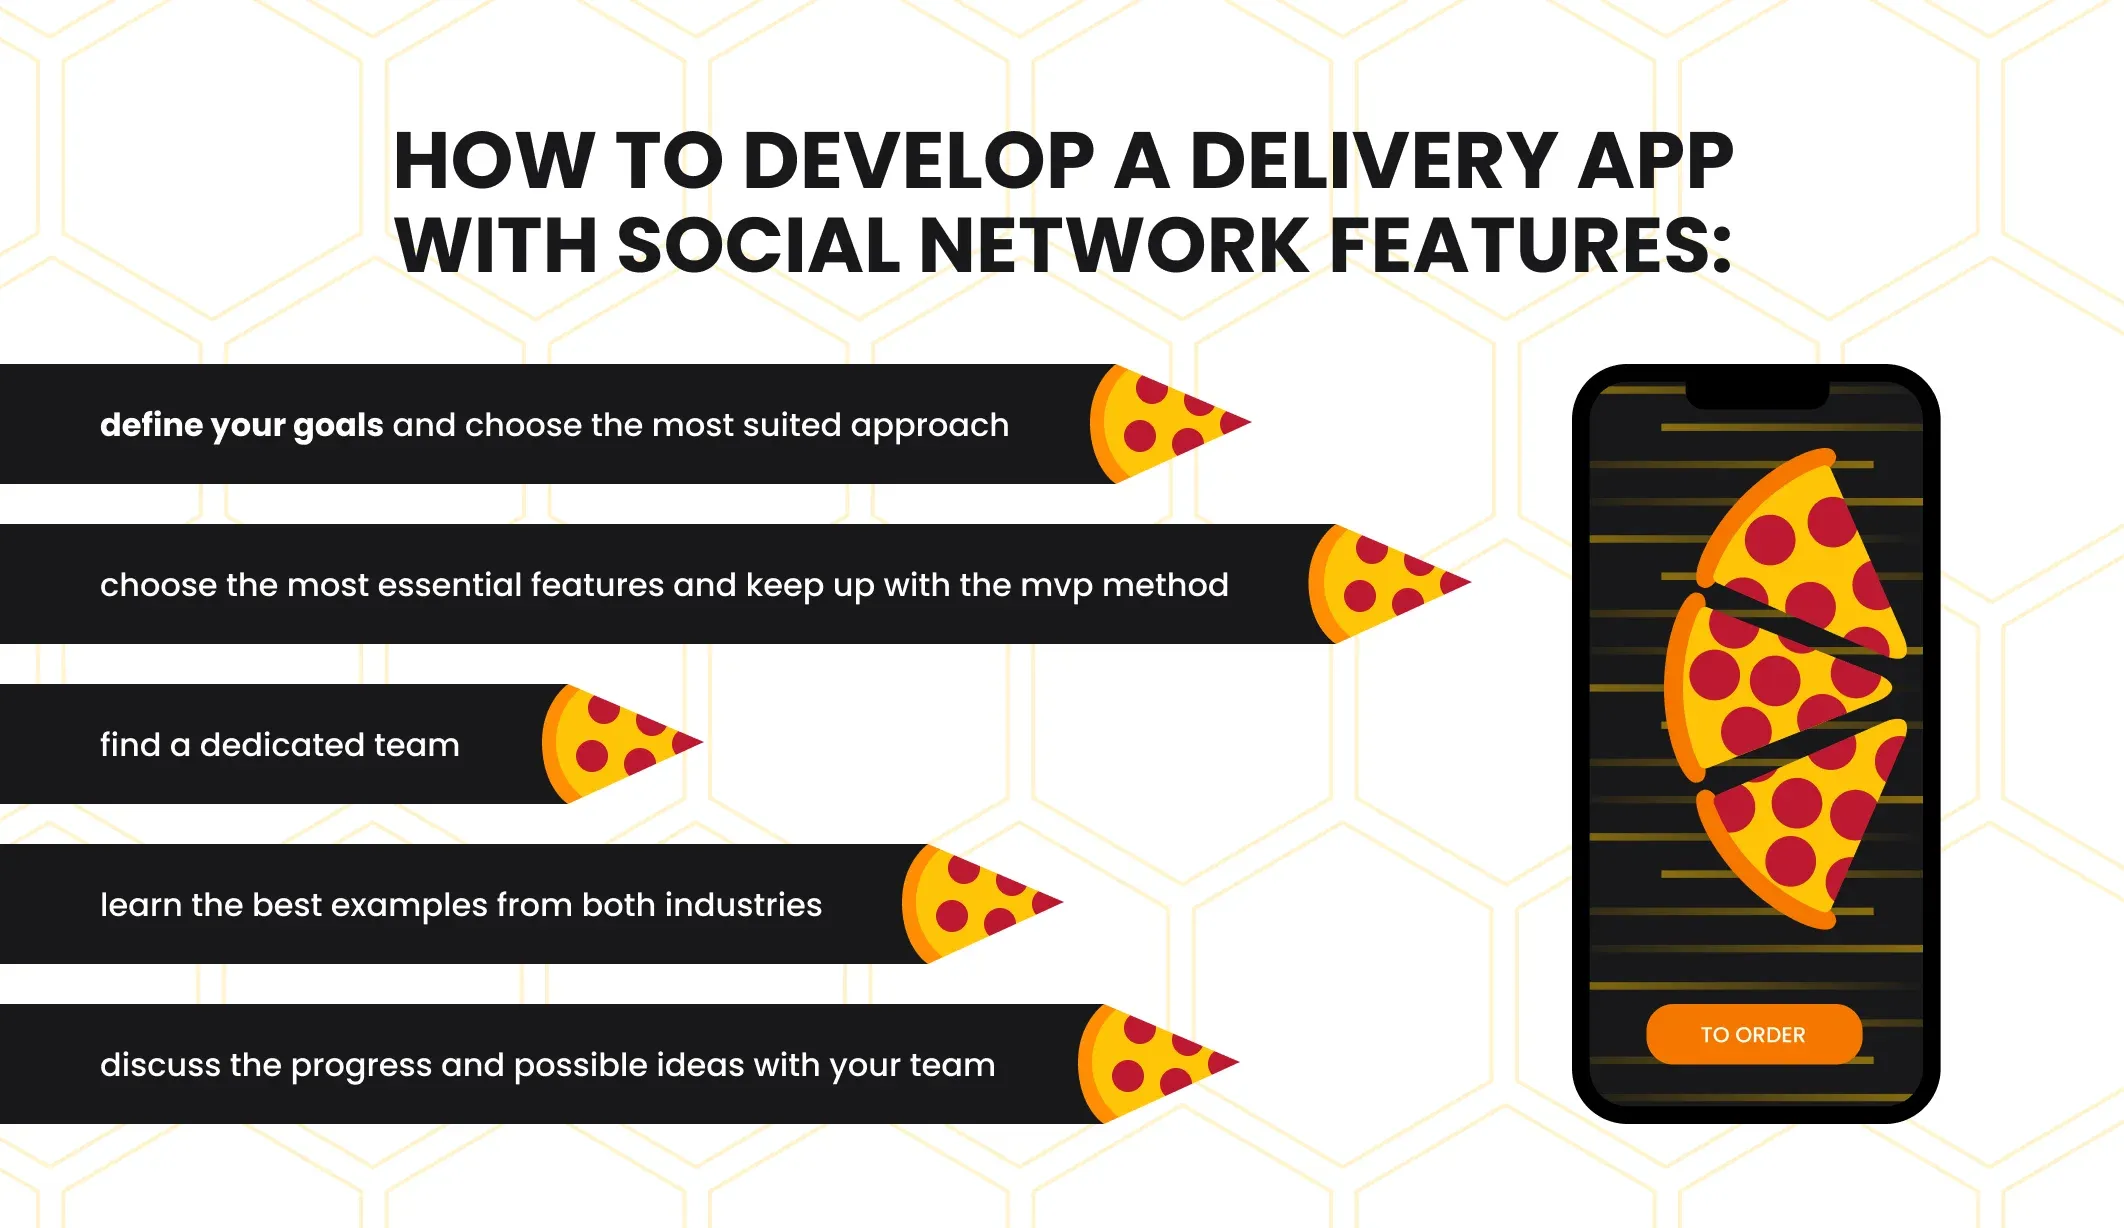 how to implement social media features in delivery apps